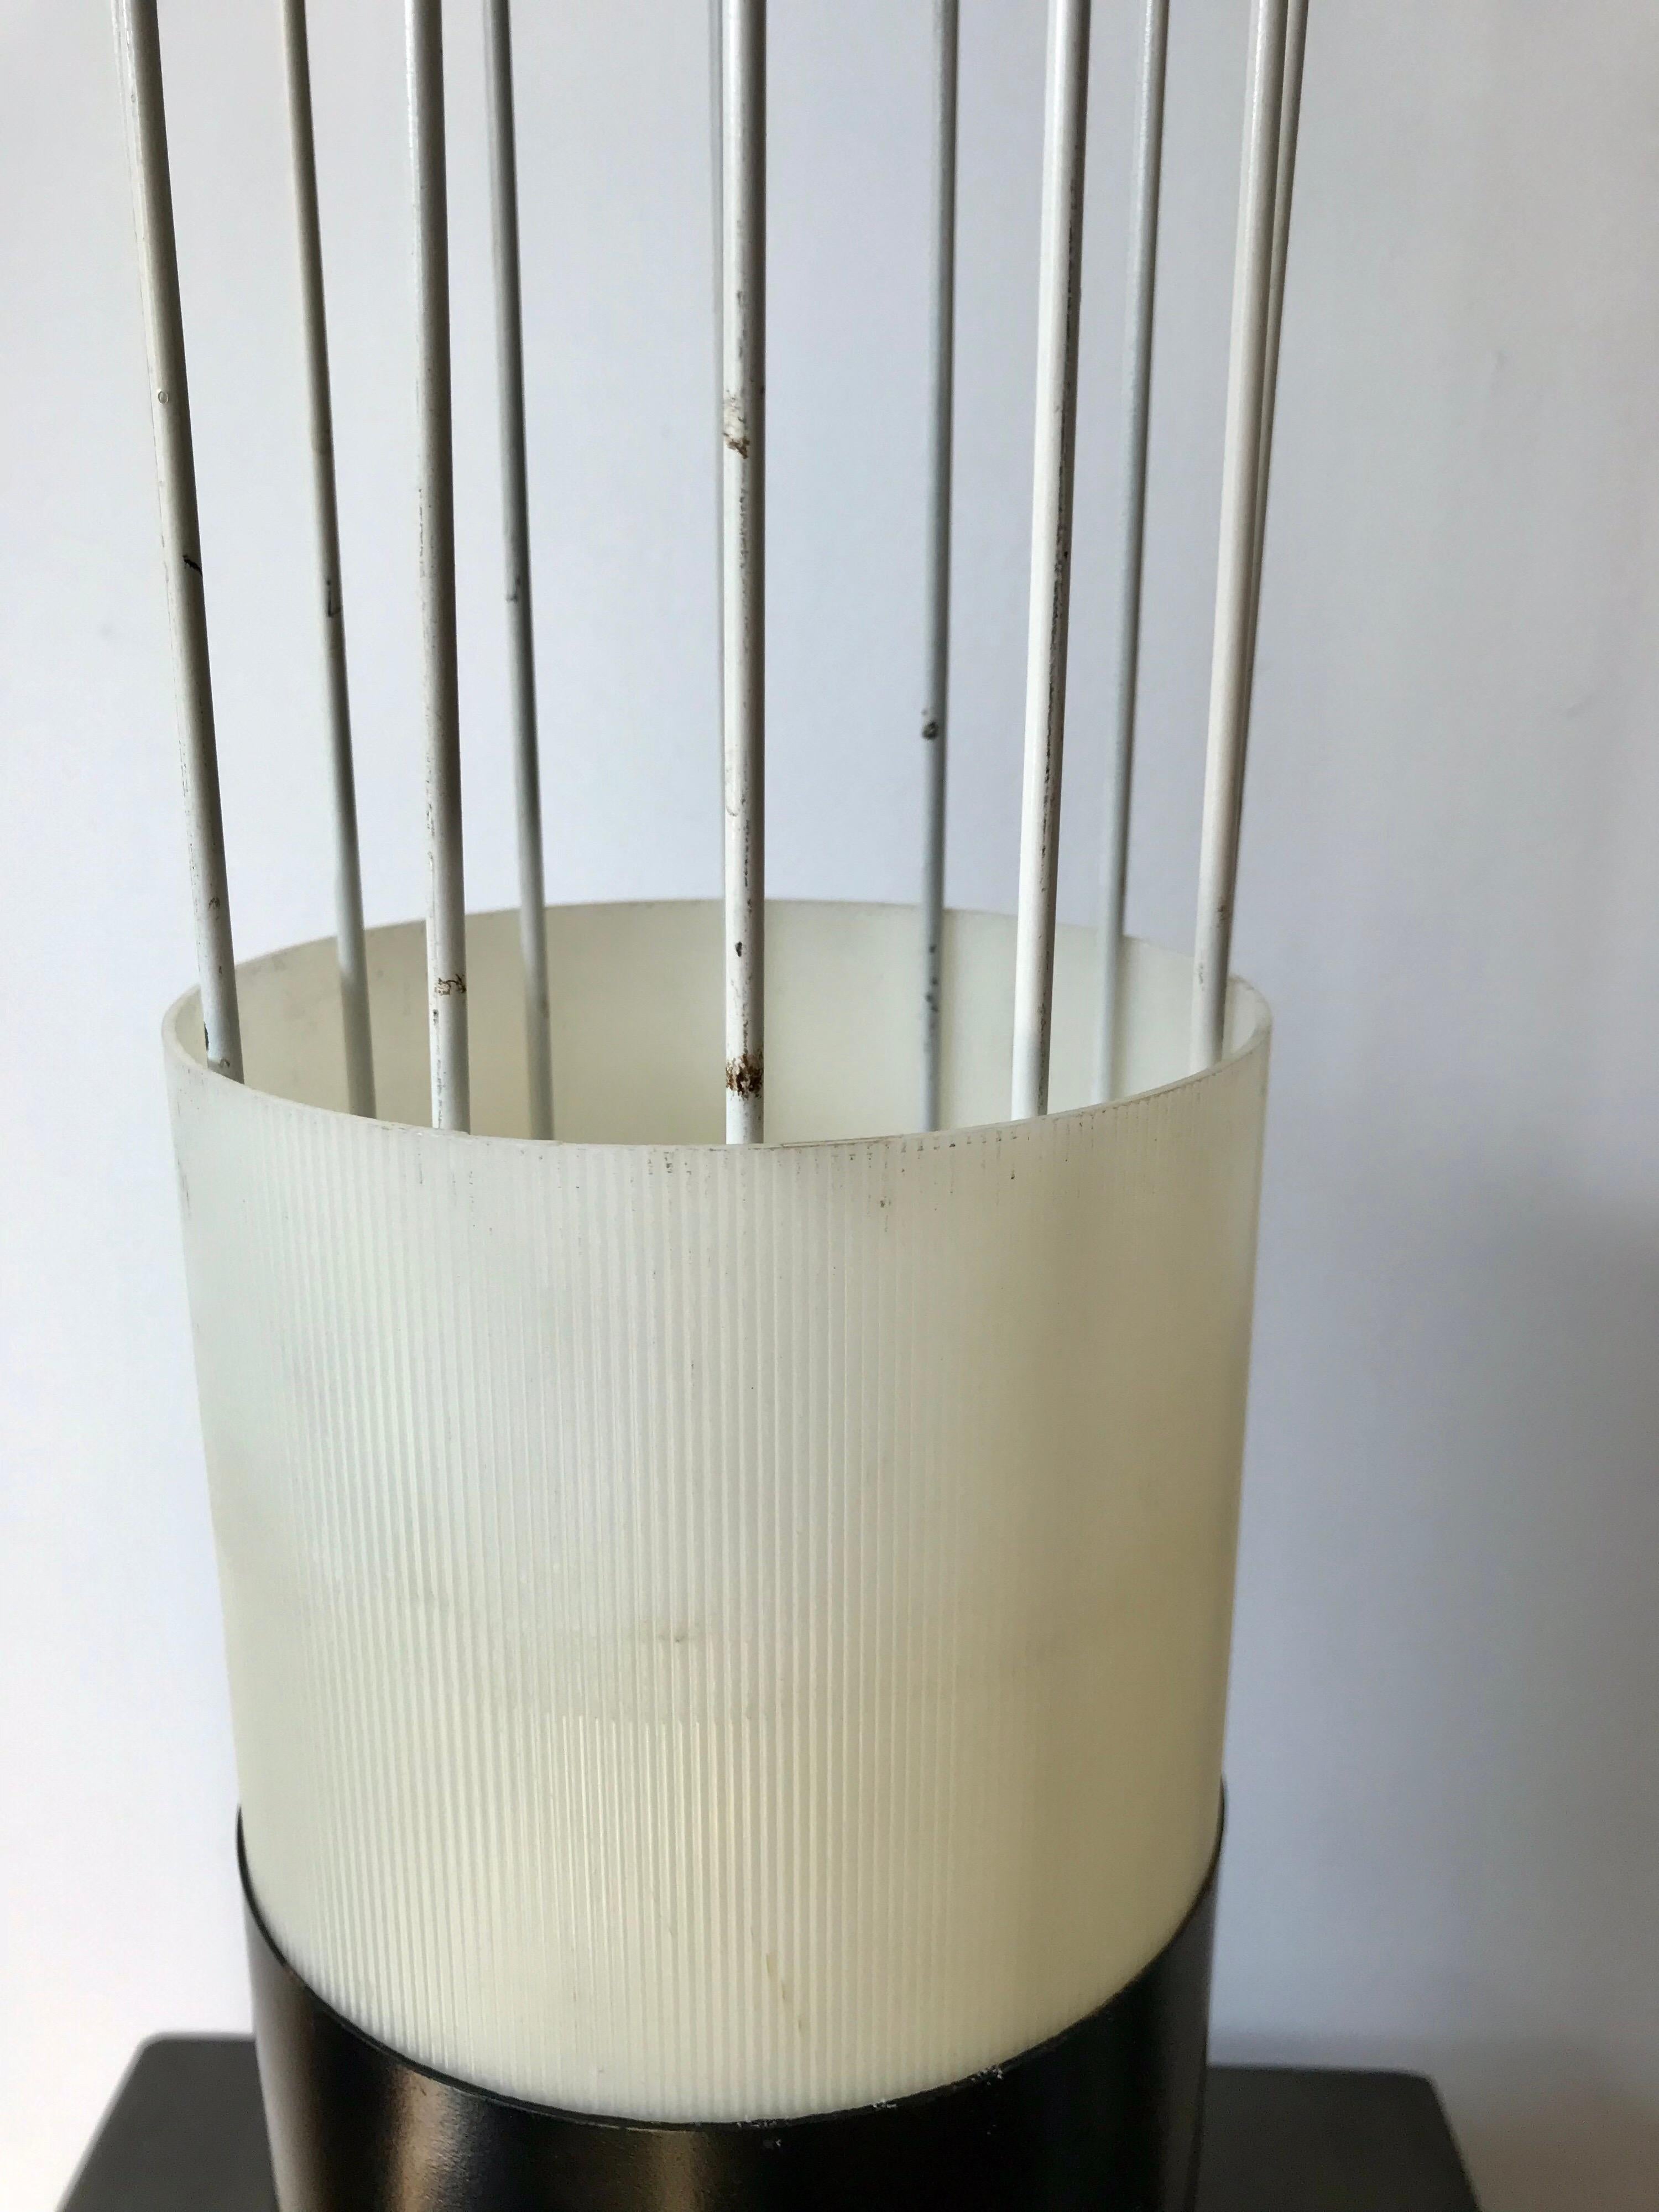 Metalwork Bill Curry 'Cattails' Lamp